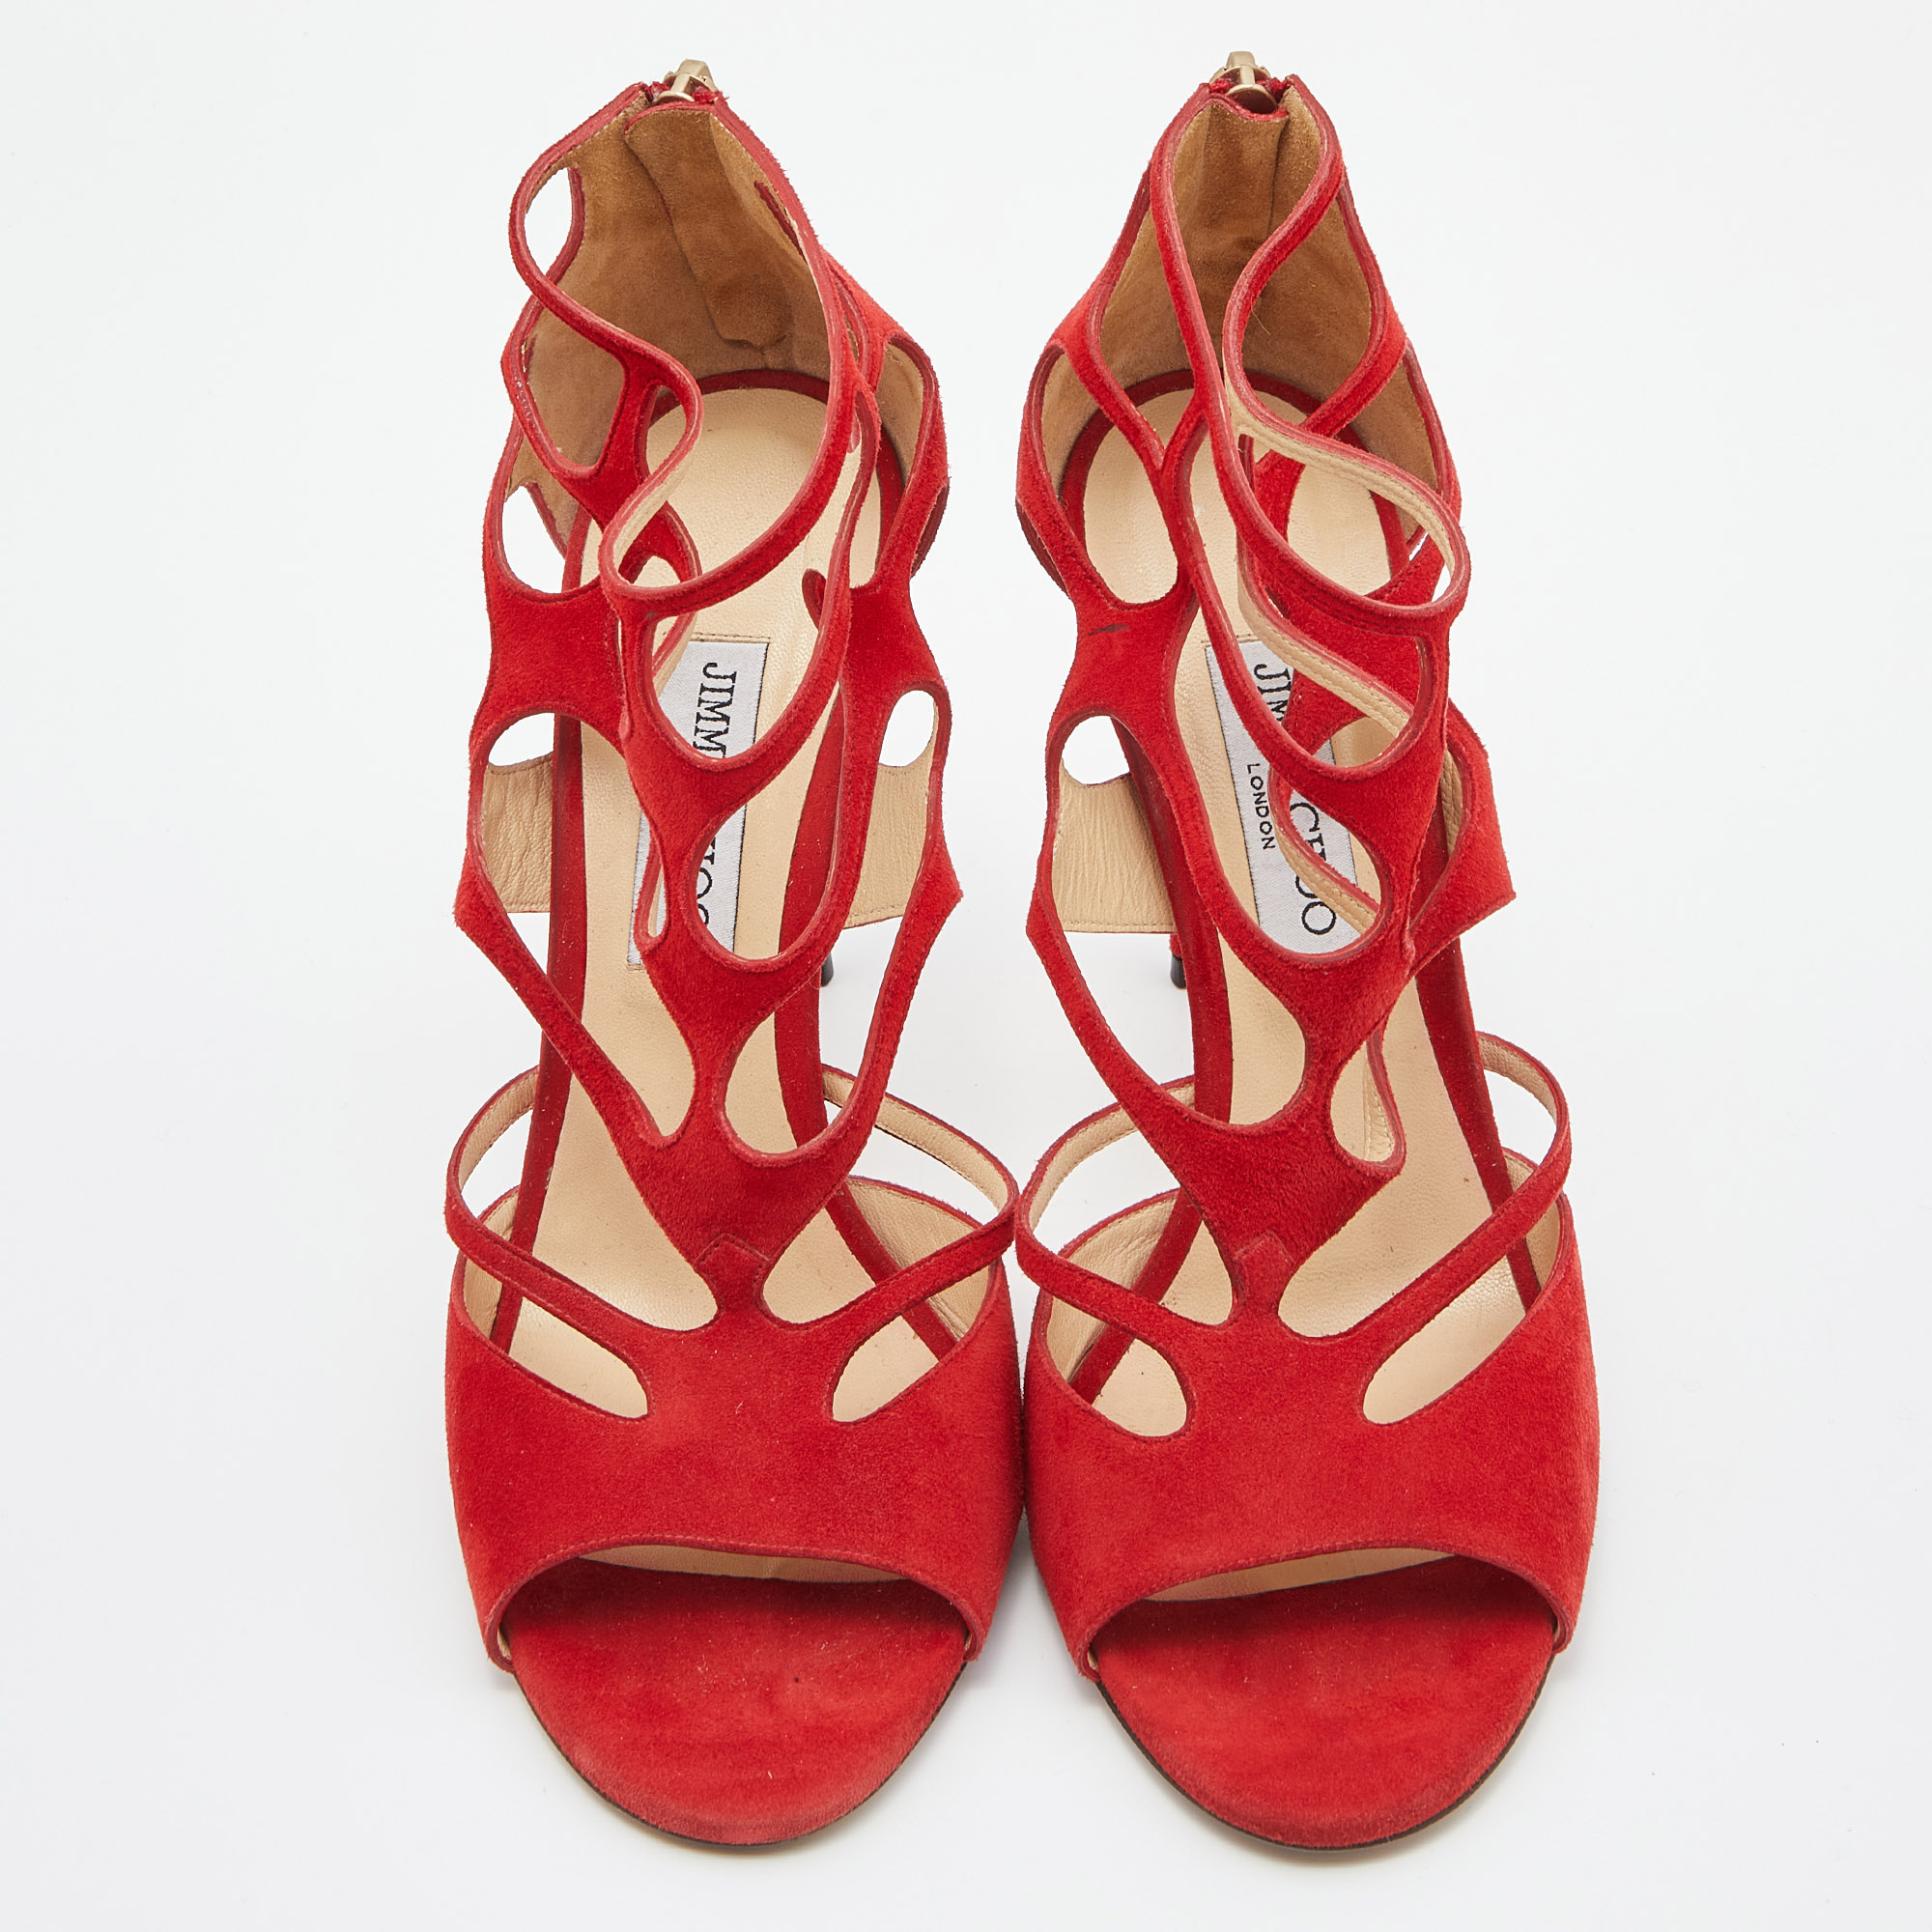 Jimmy Choo Red Suede Ren Cut Out Peep Toe Sandals Size 42